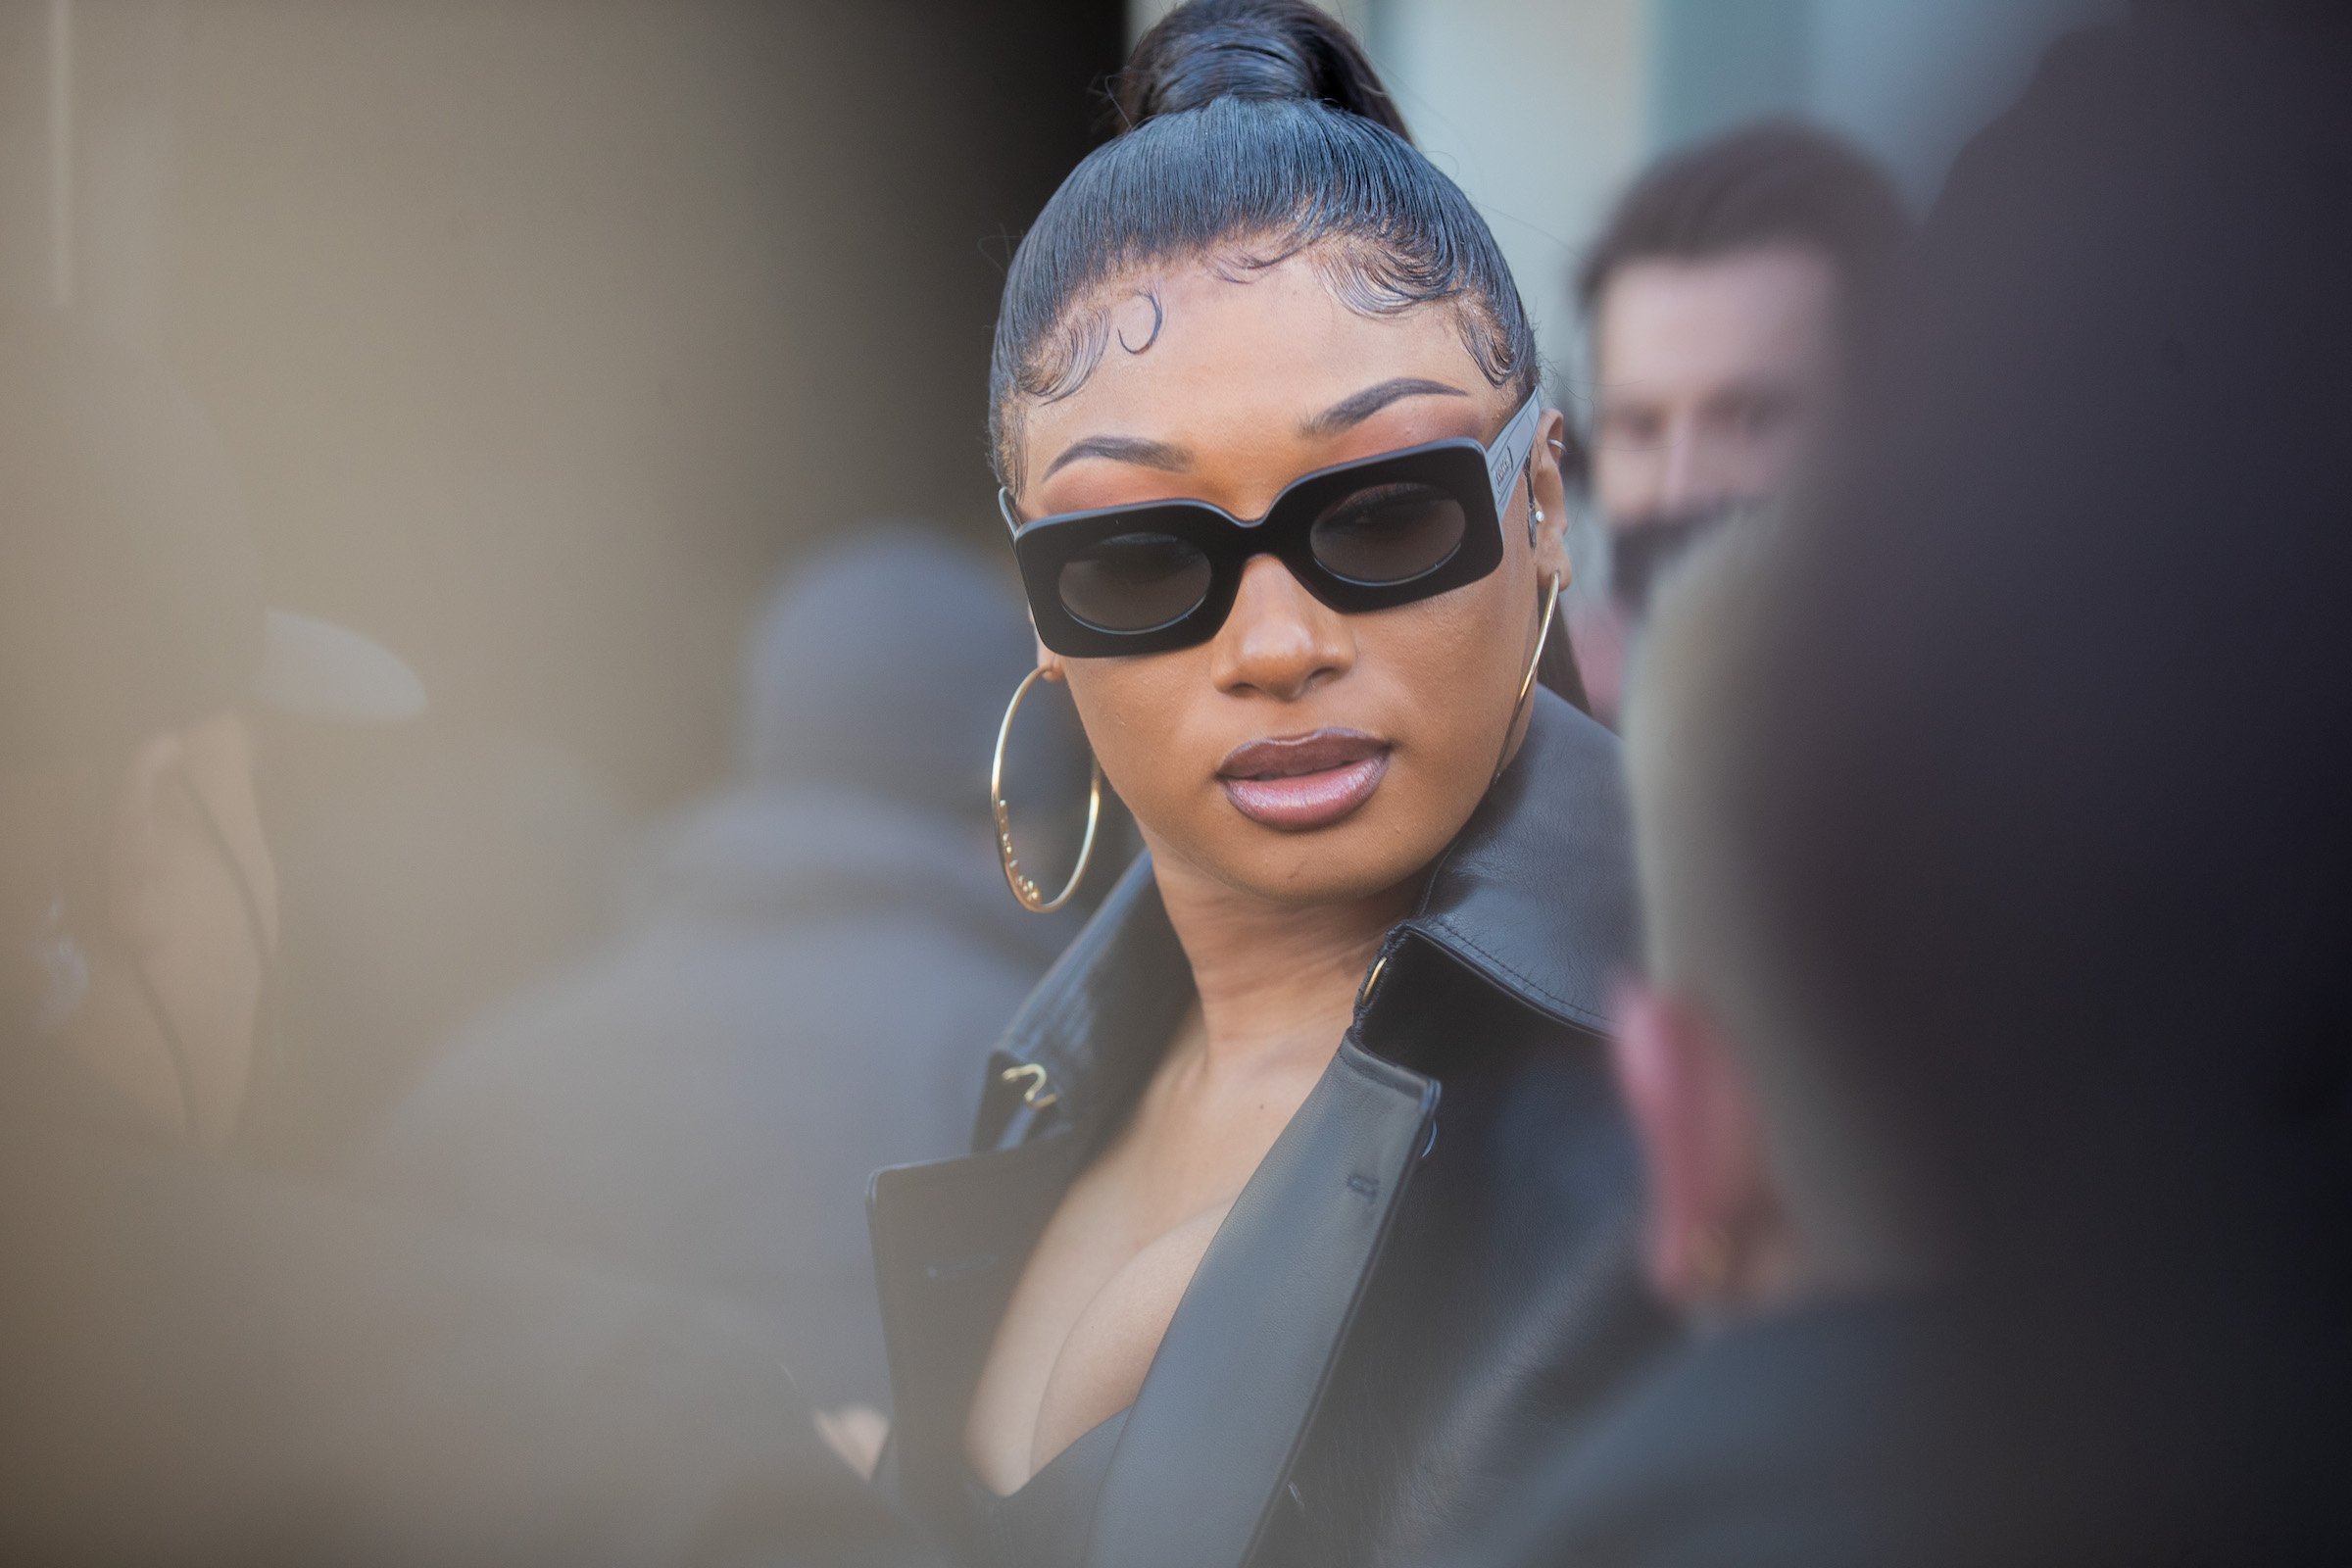 Megan Thee Stallion wearing sunglasses and all black